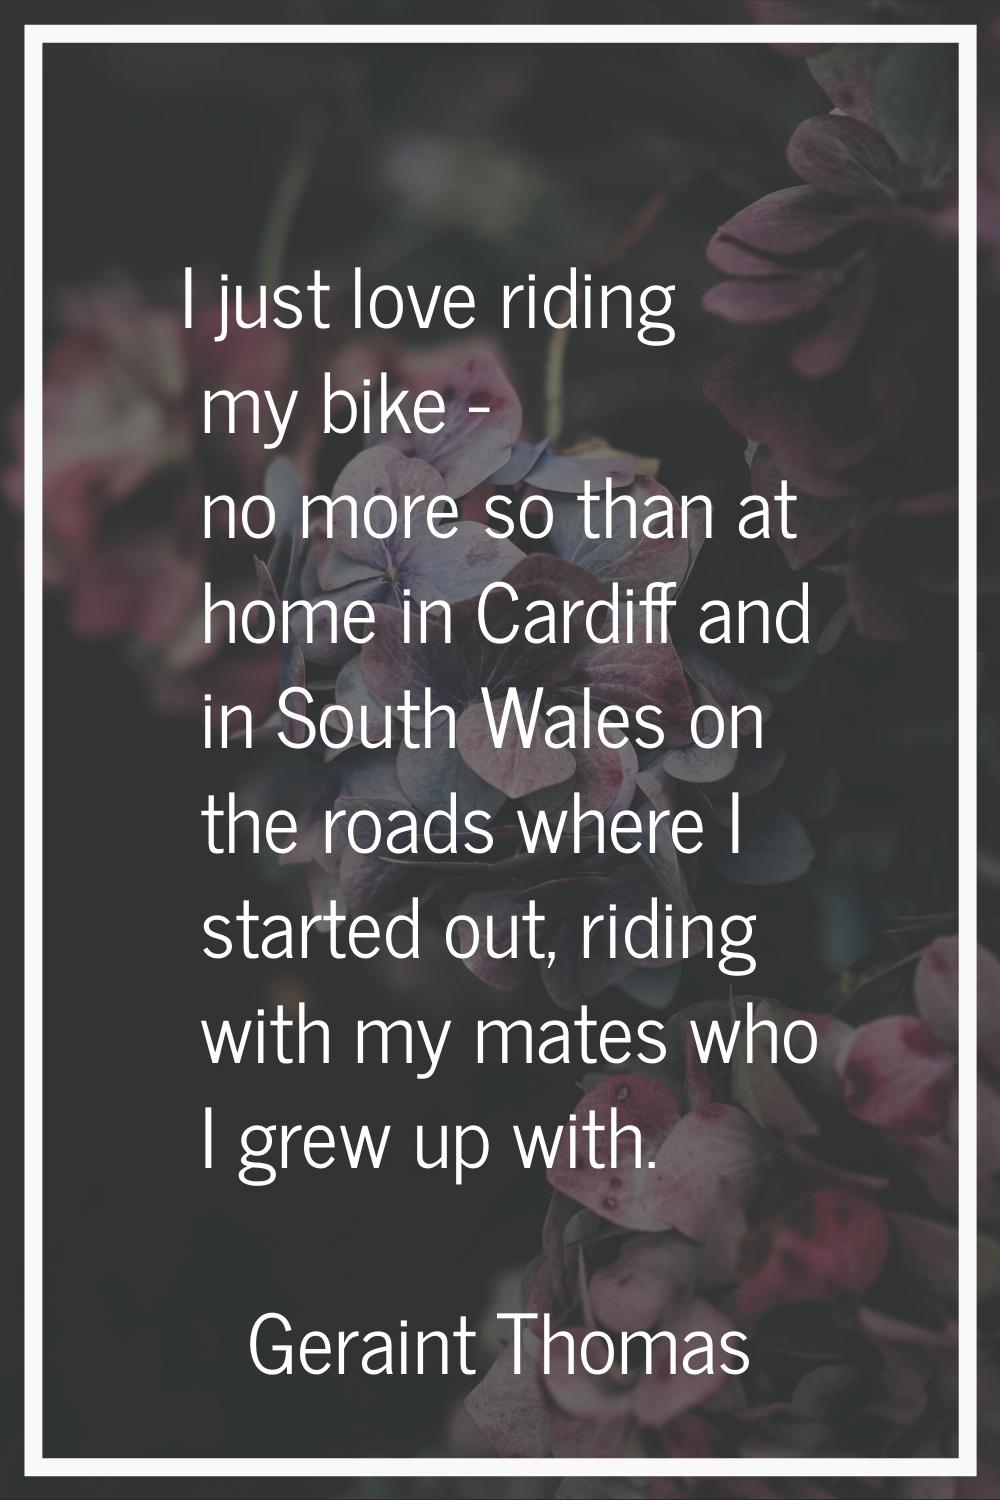 I just love riding my bike - no more so than at home in Cardiff and in South Wales on the roads whe